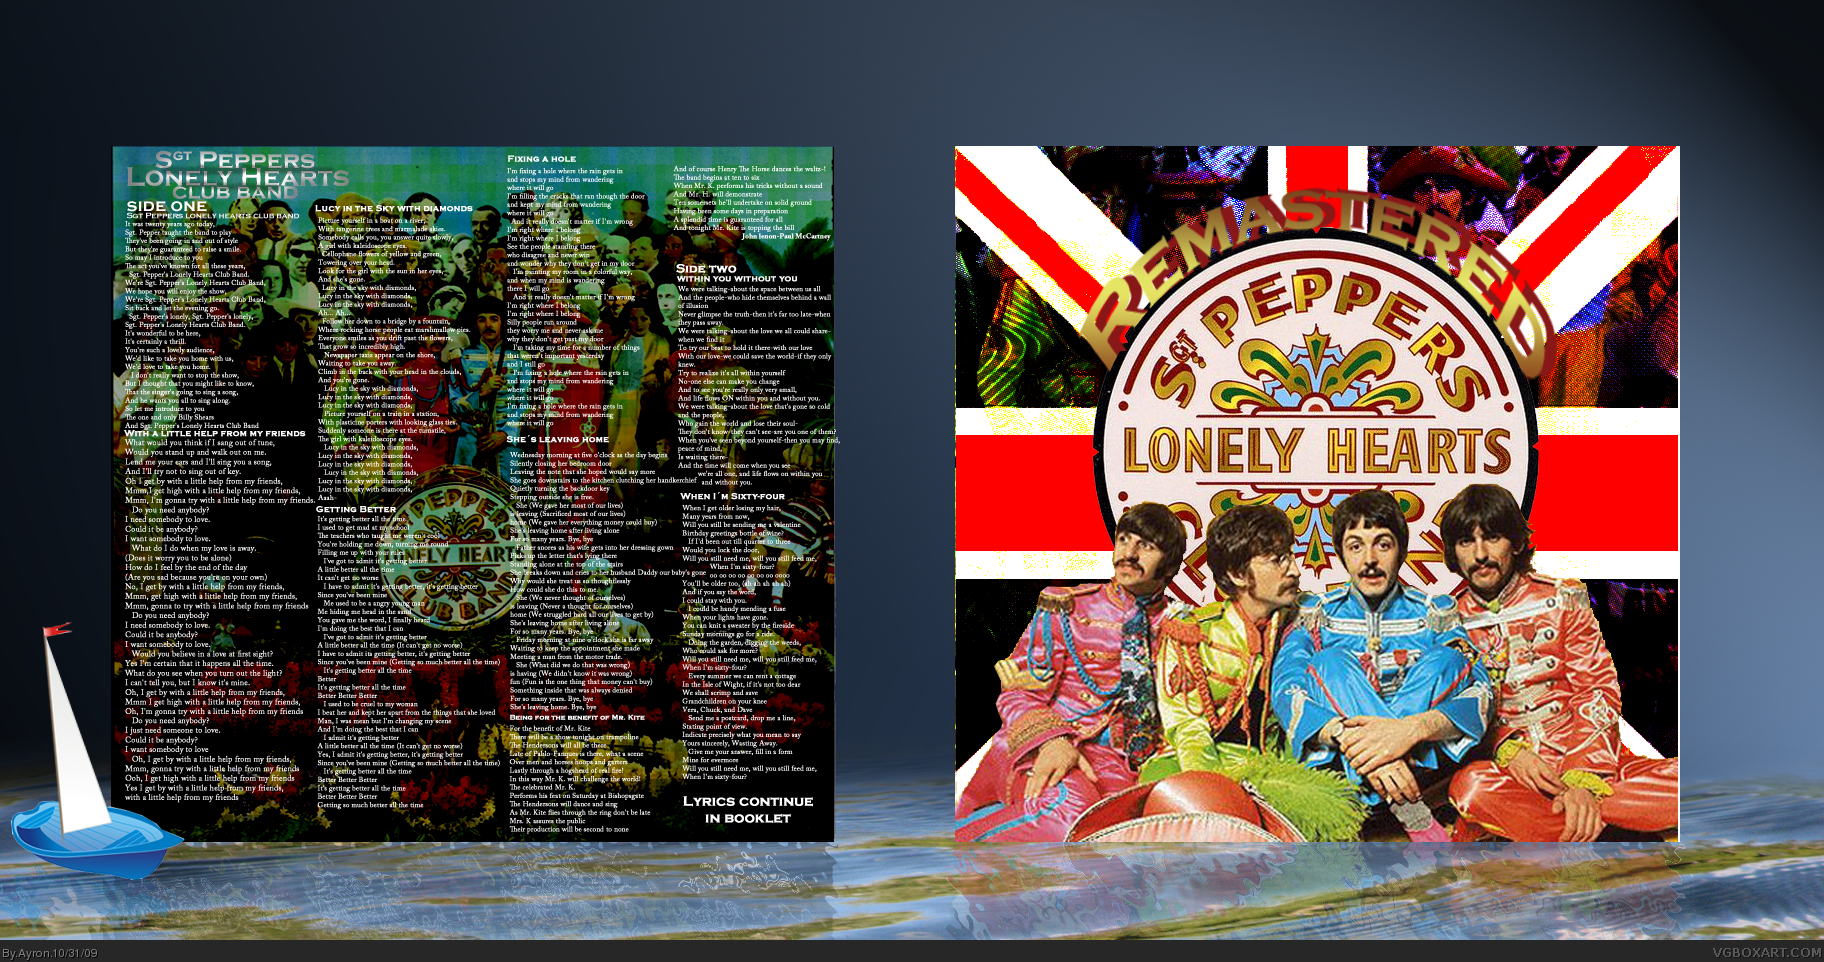 Sgt Peppers Lonely Hearts Club Band : Remastered box cover